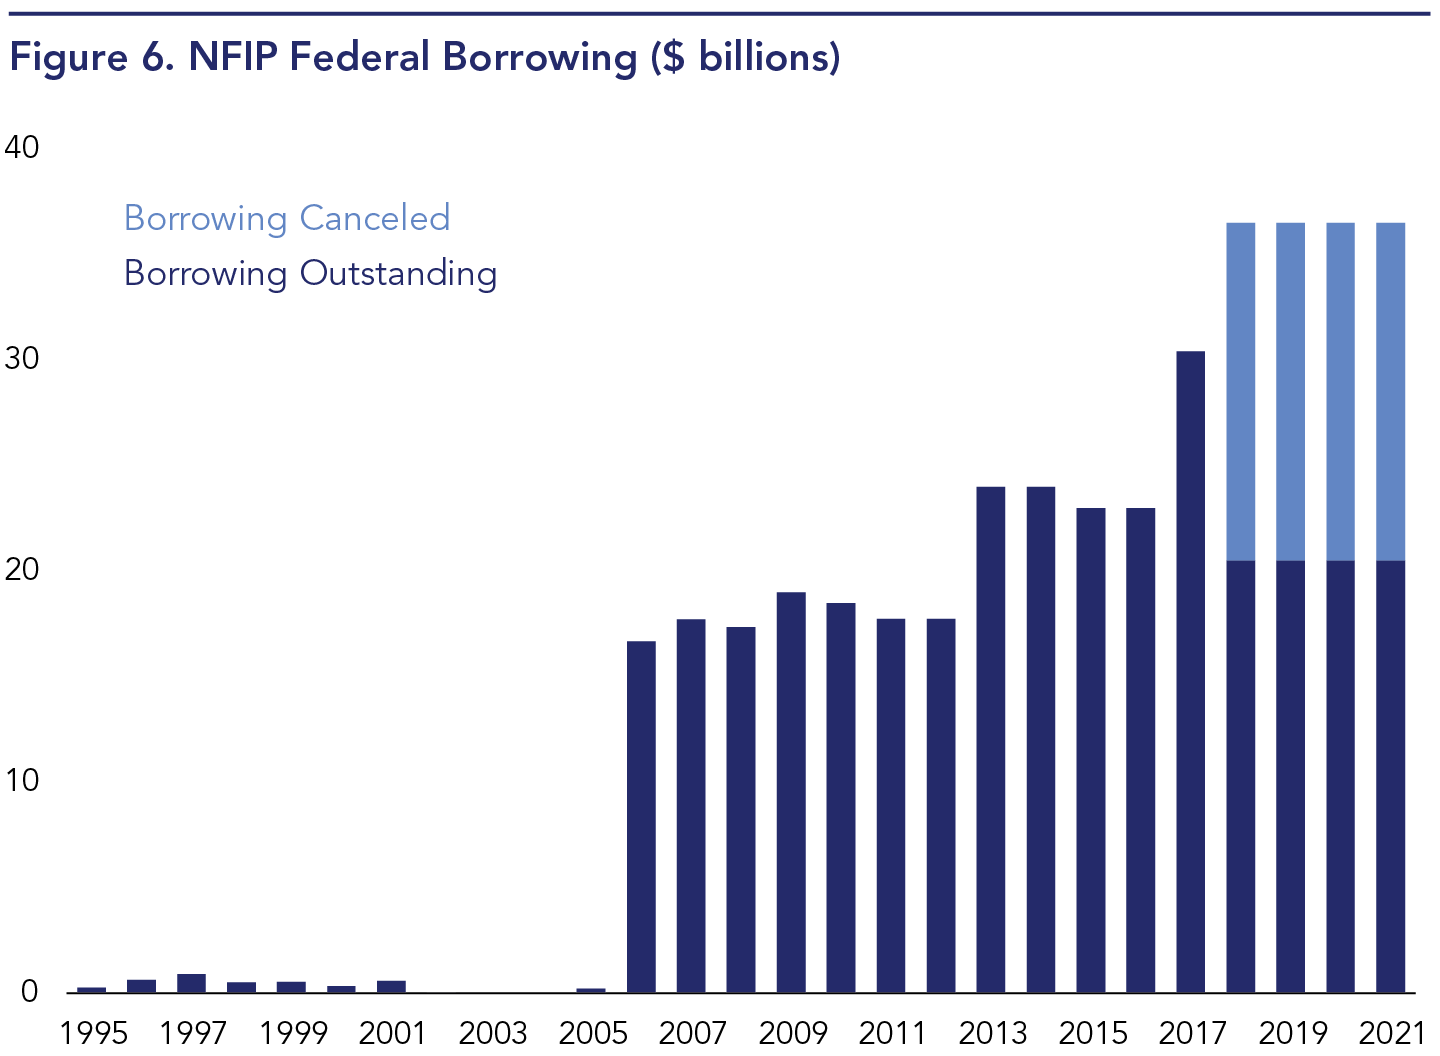 The National Flood Insurance Program has run up regular losses resulting in growing debt outstanding to the U.S Treasury since 2006